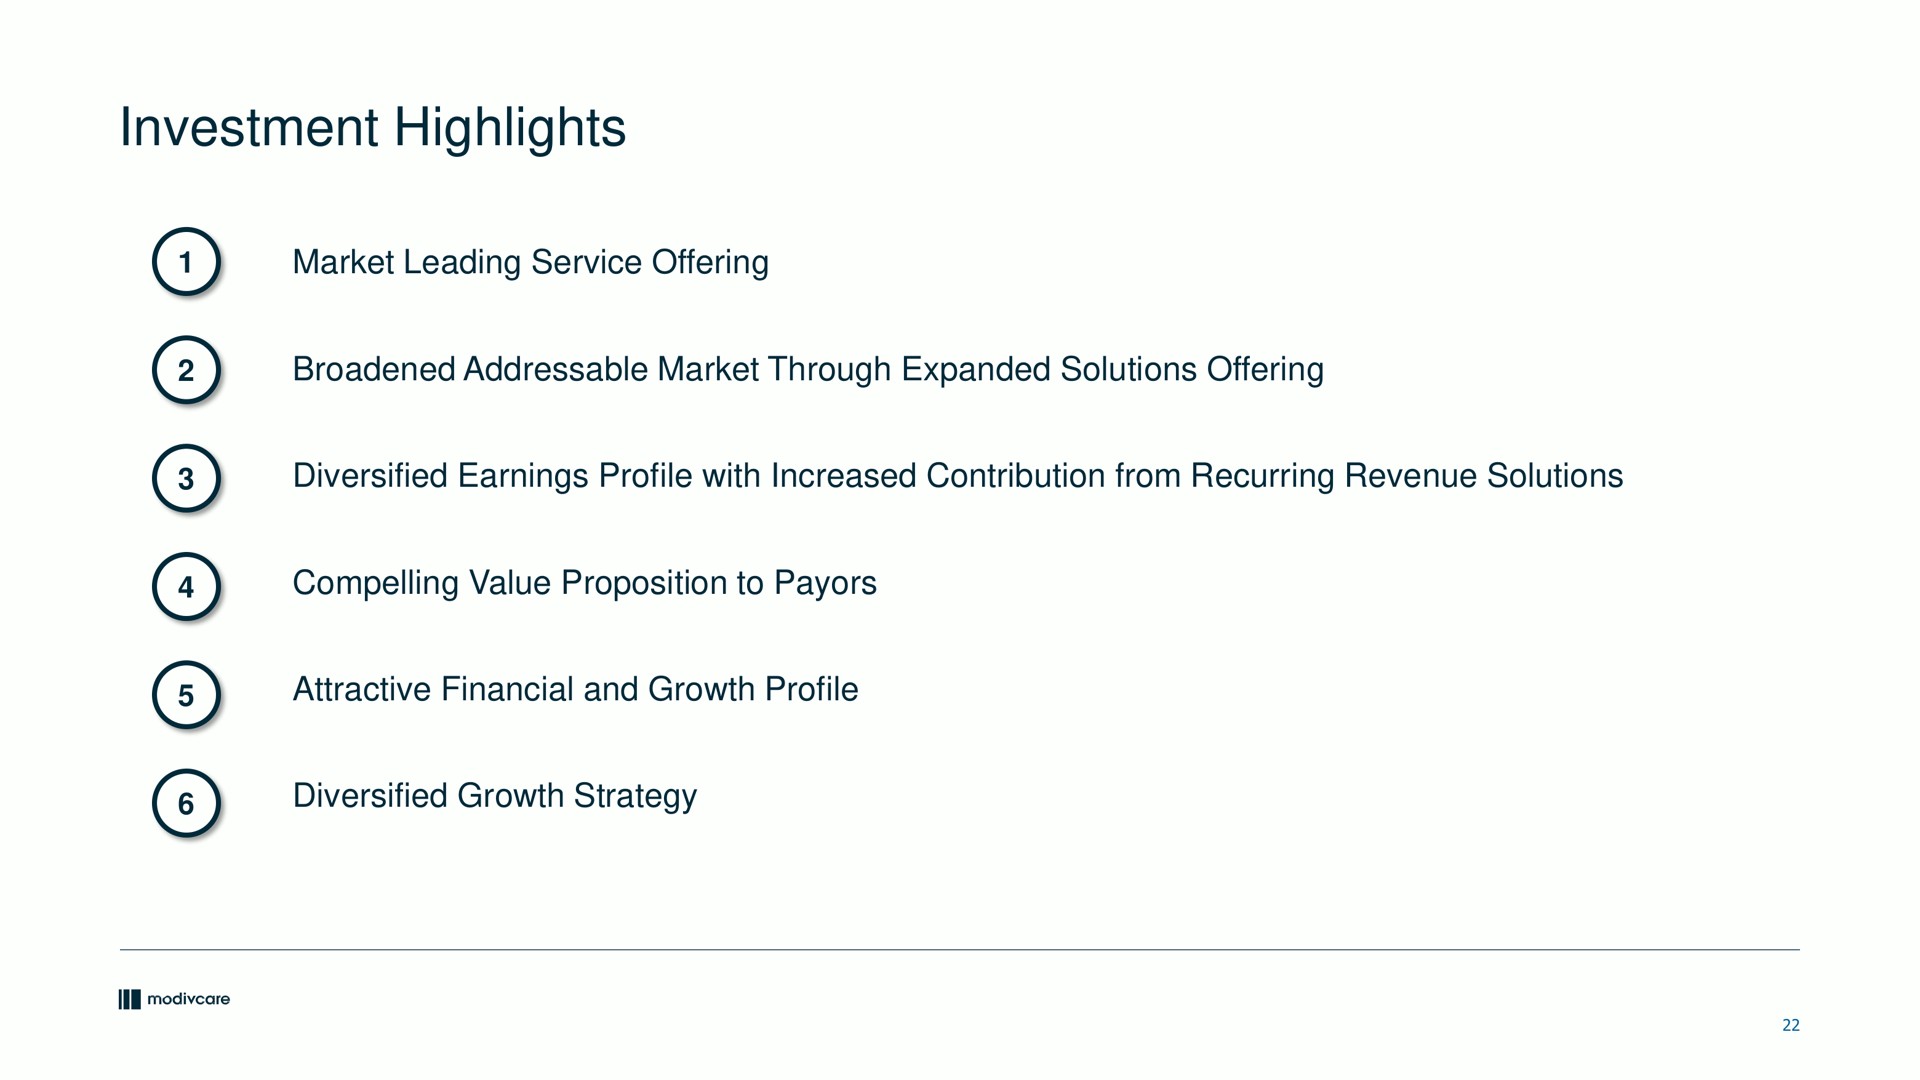 investment highlights market leading service offering broadened market through expanded solutions offering diversified earnings profile with increased contribution from recurring revenue solutions compelling value proposition to attractive financial and growth profile diversified growth strategy | ModivCare